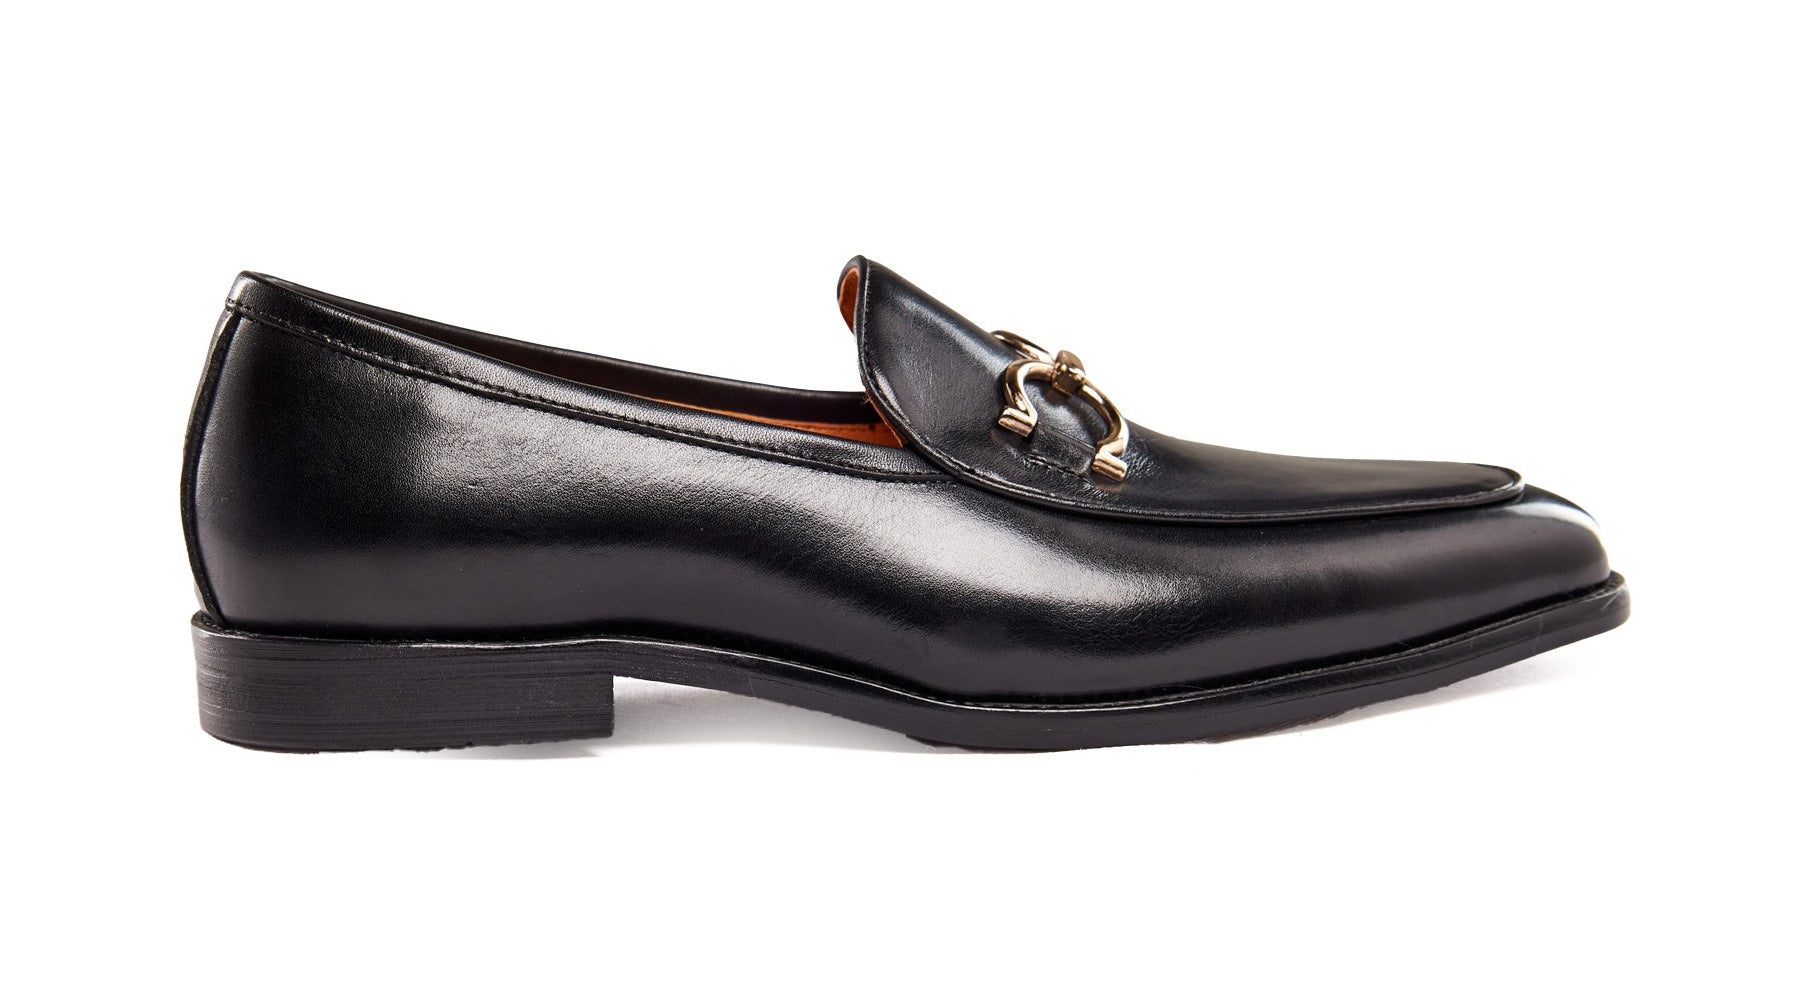 GOLD BUCKLE LOAFERS IN BLACK